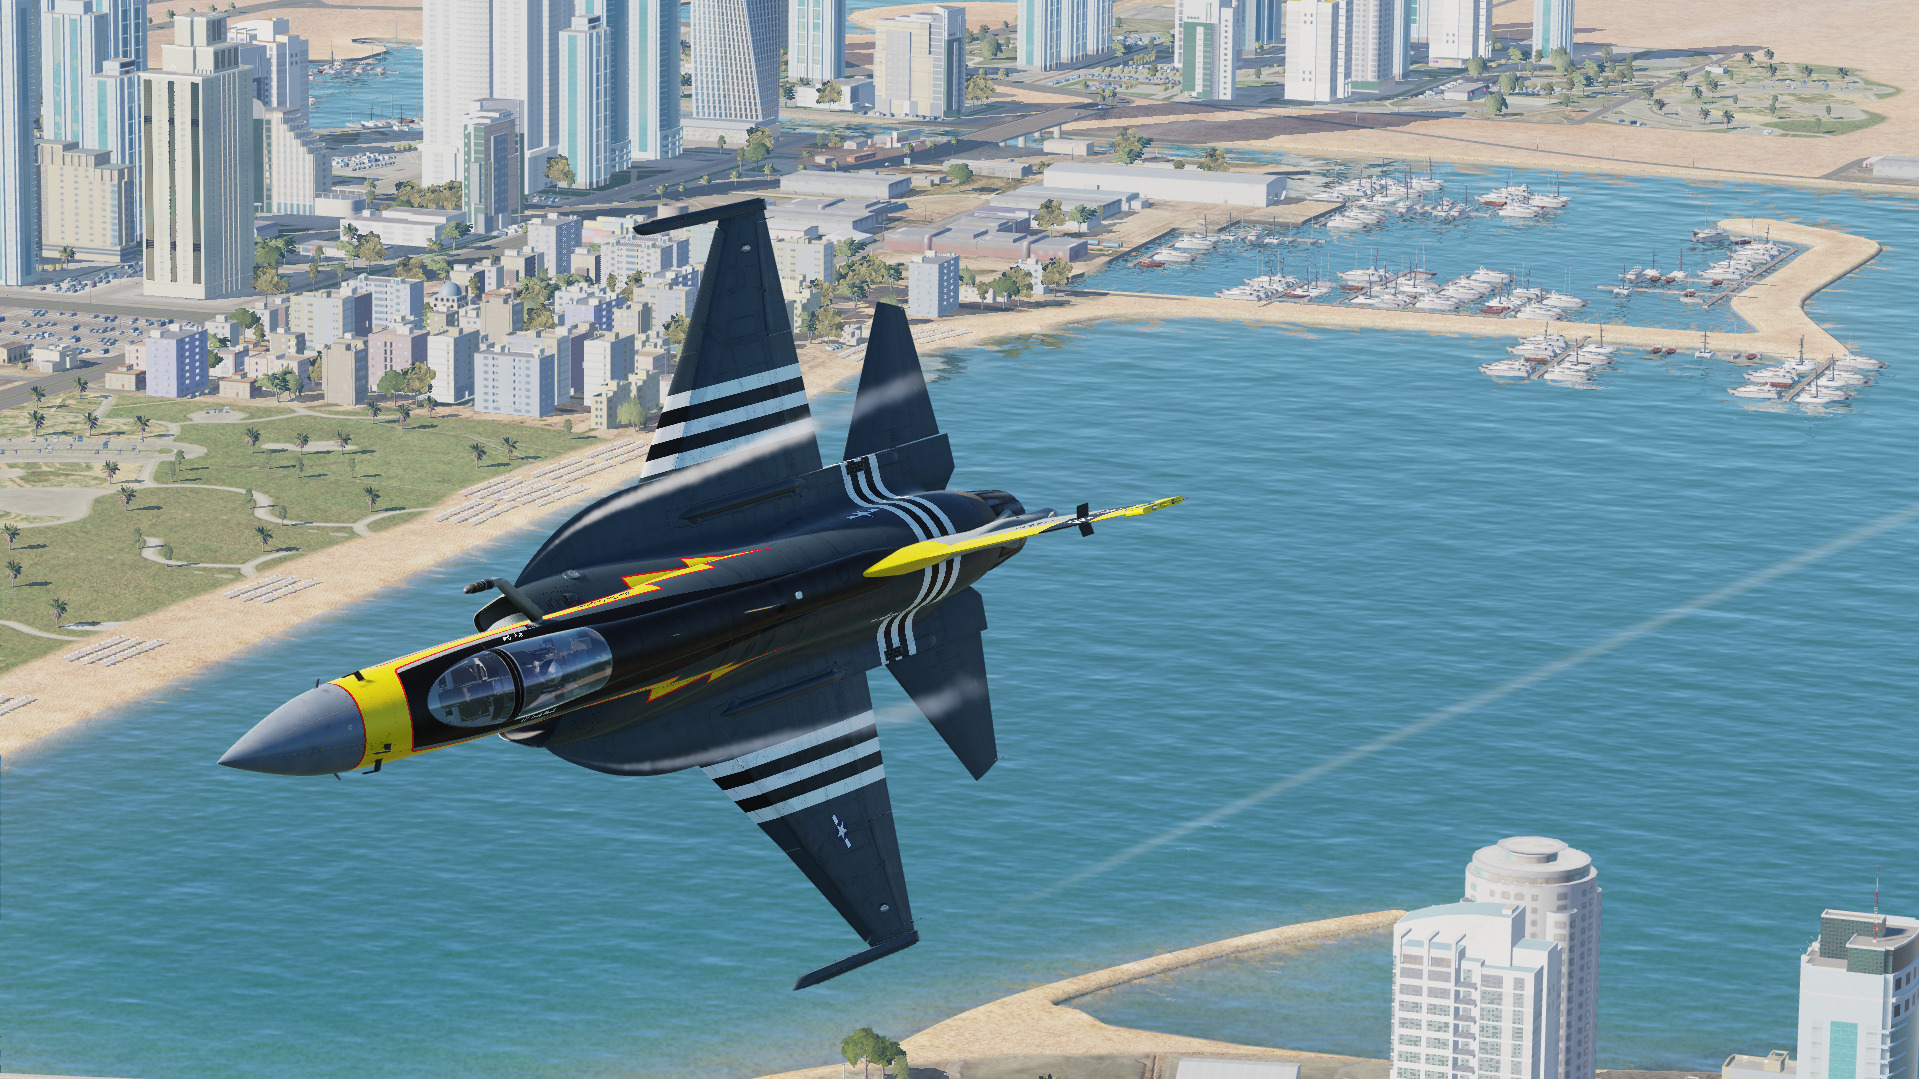 149th FW- 70th Anniversary (F-16C Inspired Livery)